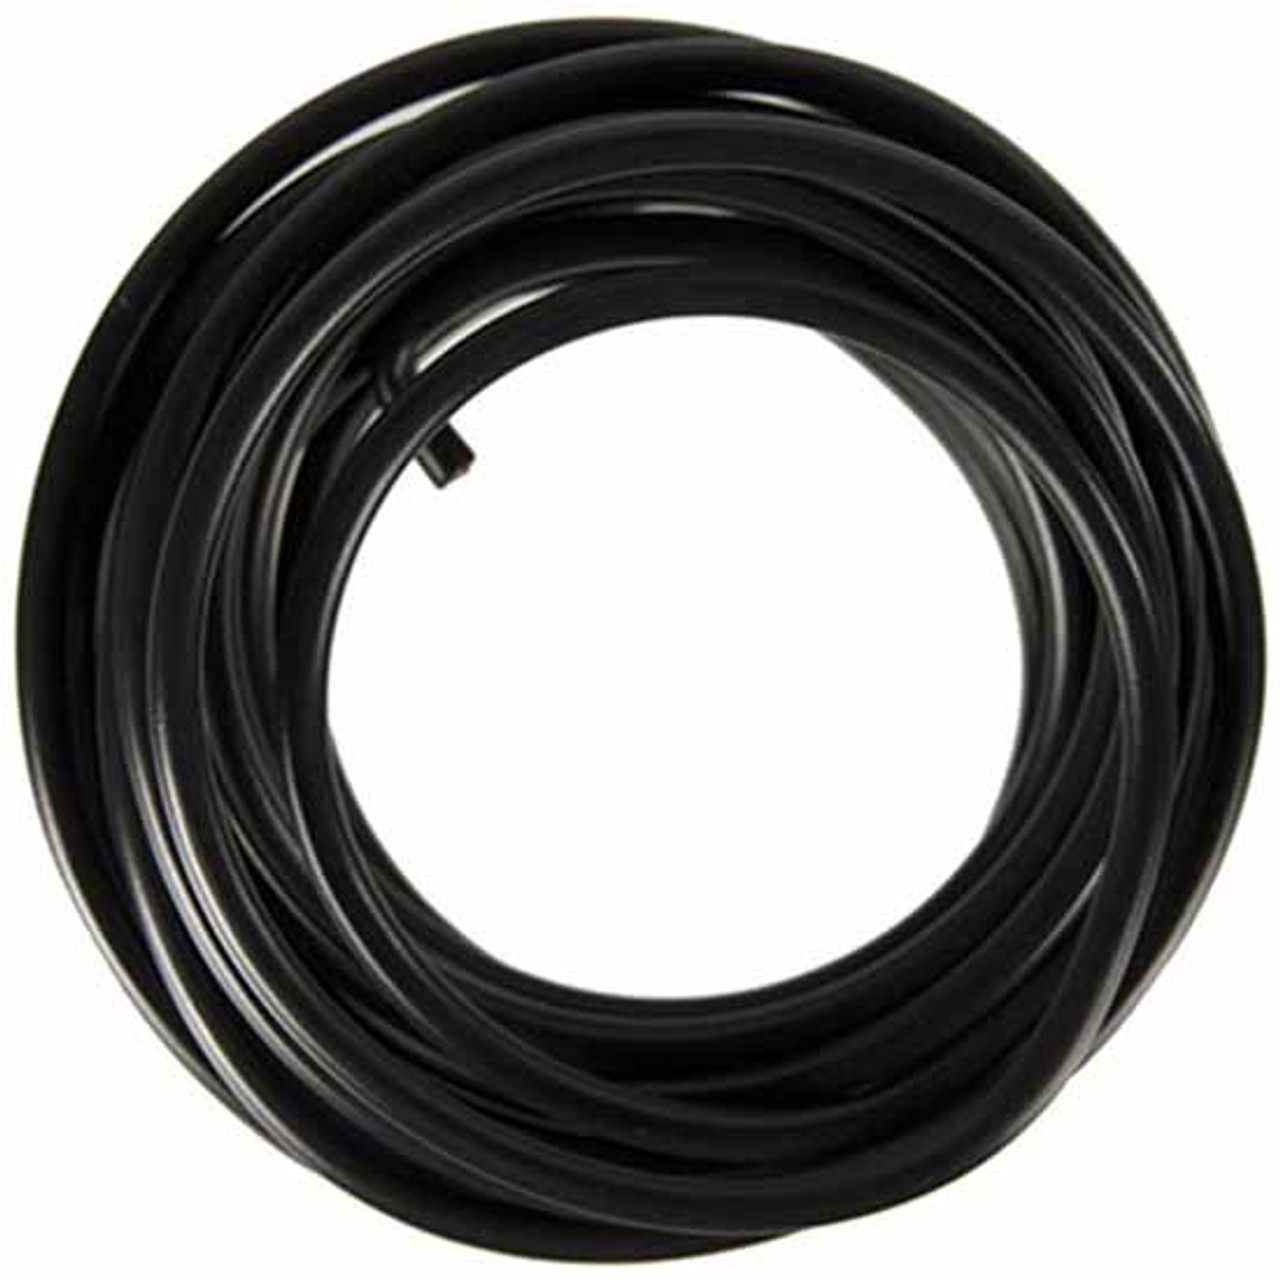 Primary Wire - Rated 80 C 12 AWG, Black 12 Ft.